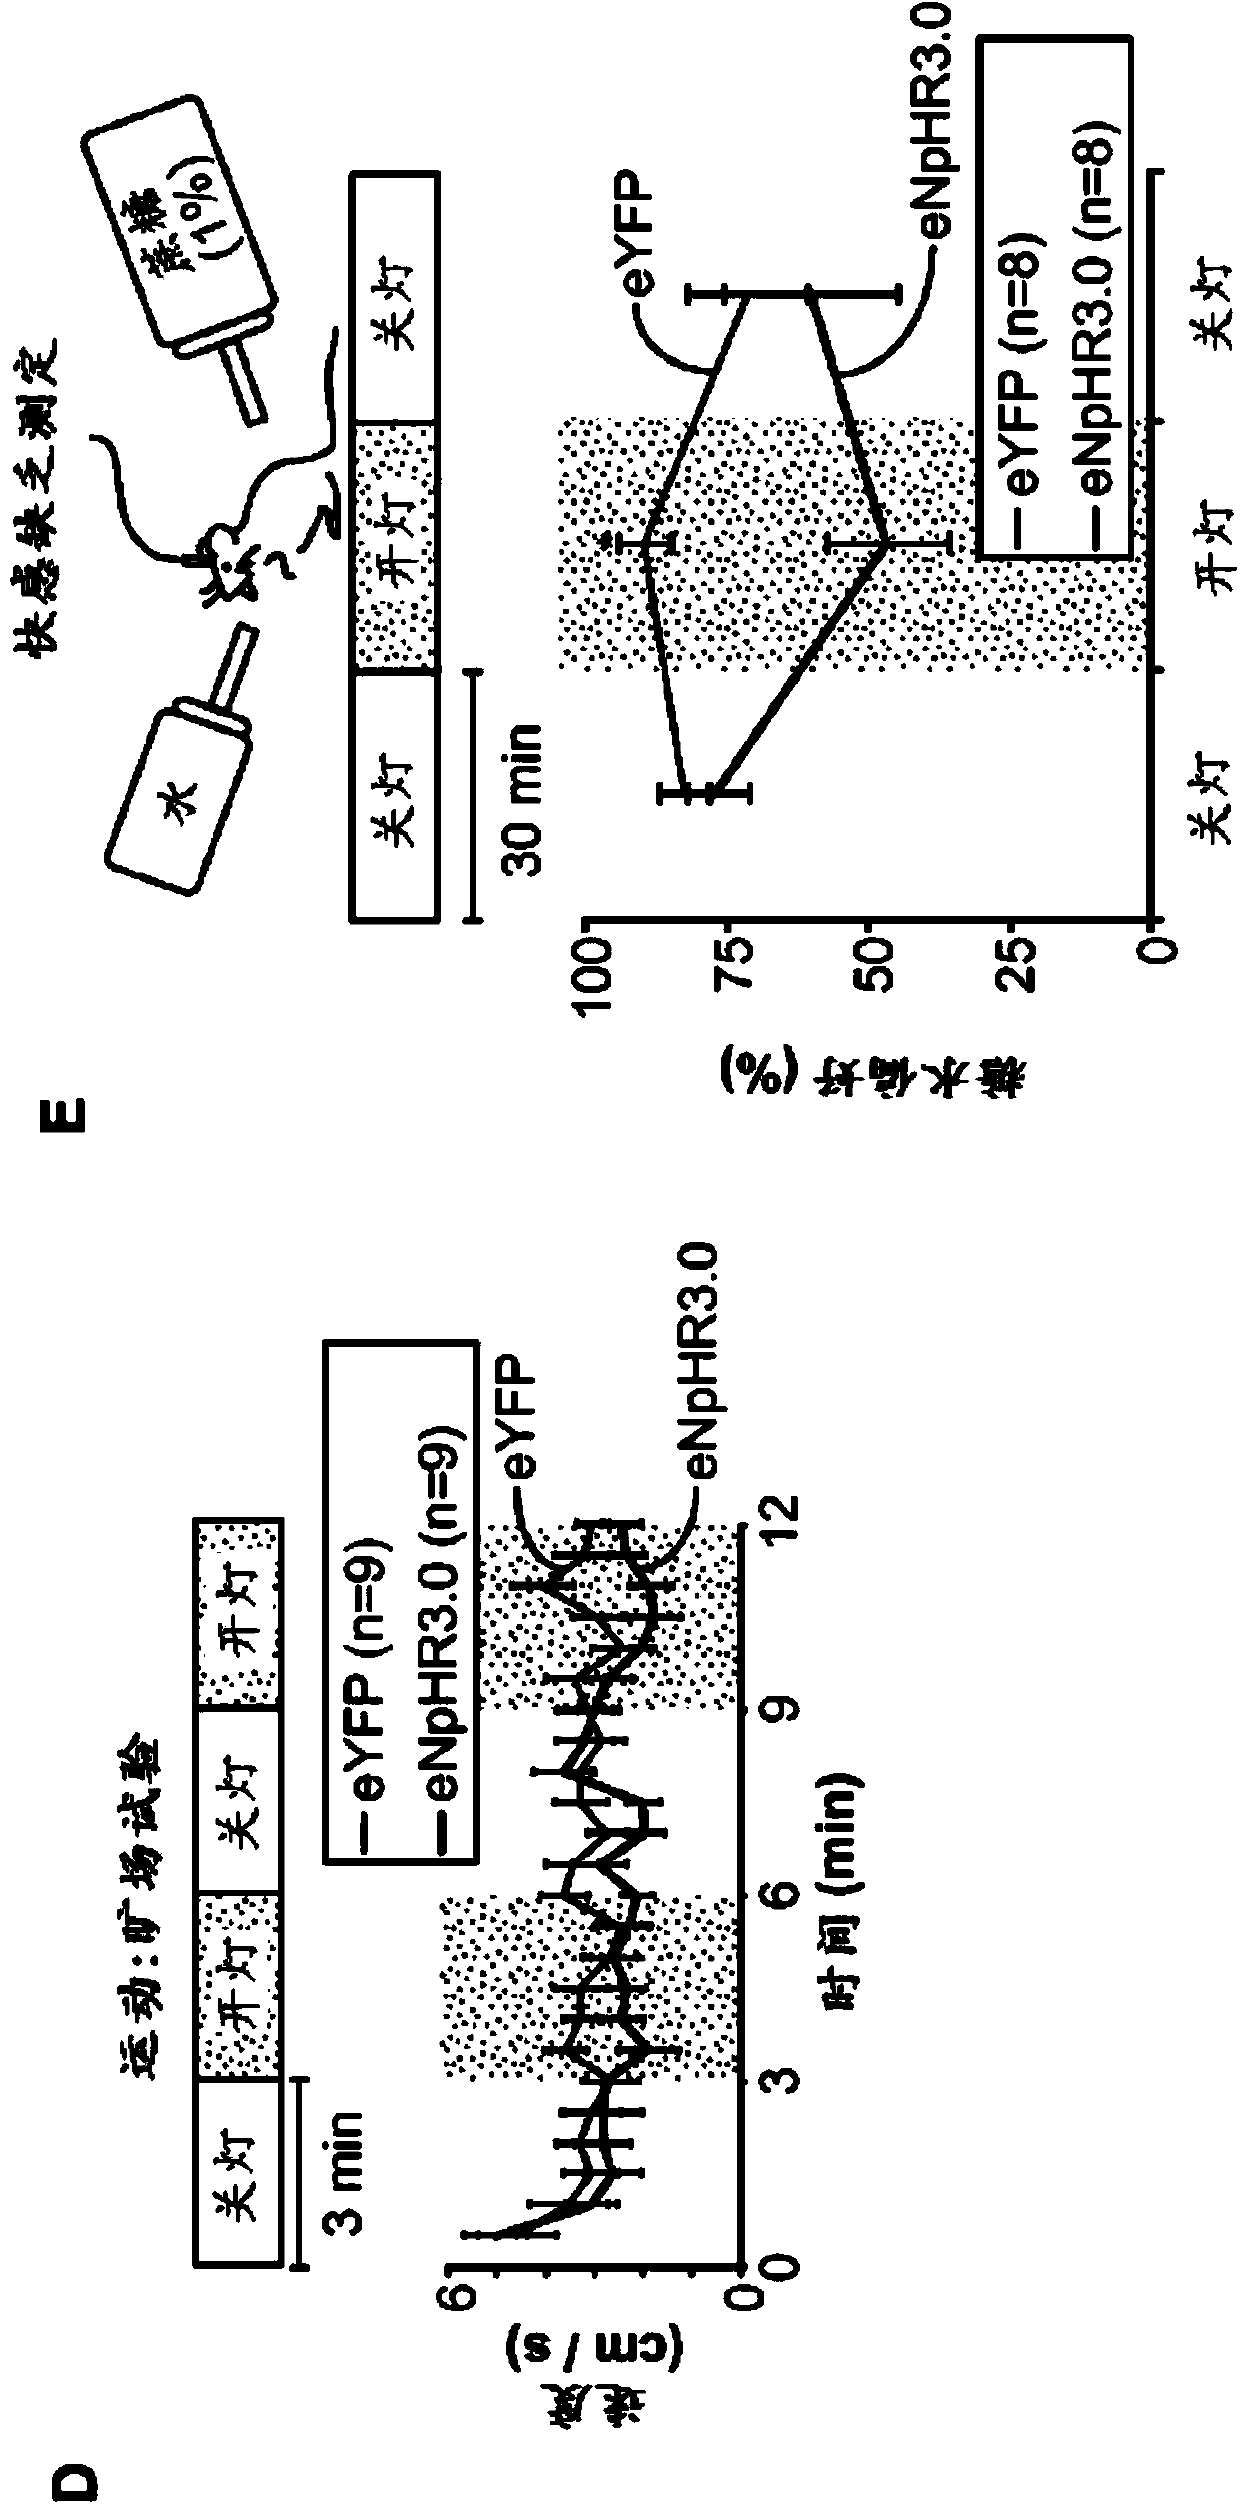 Non-human animal models of depression and methods of use thereof